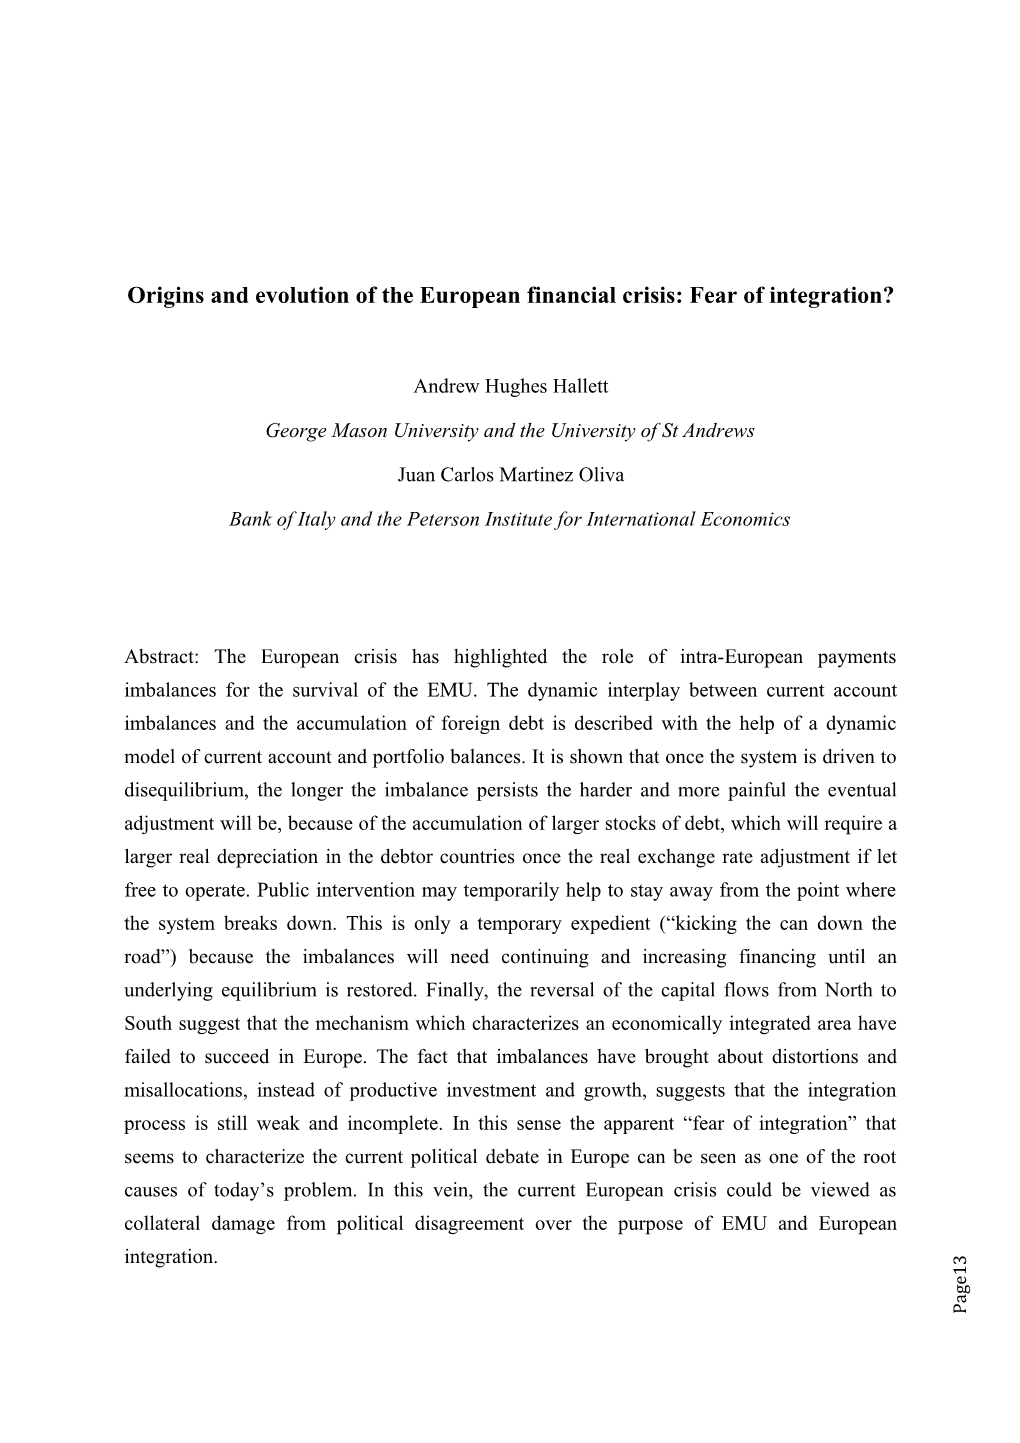 Origins and Evolution of the European Financial Crisis: Fear of Integration?